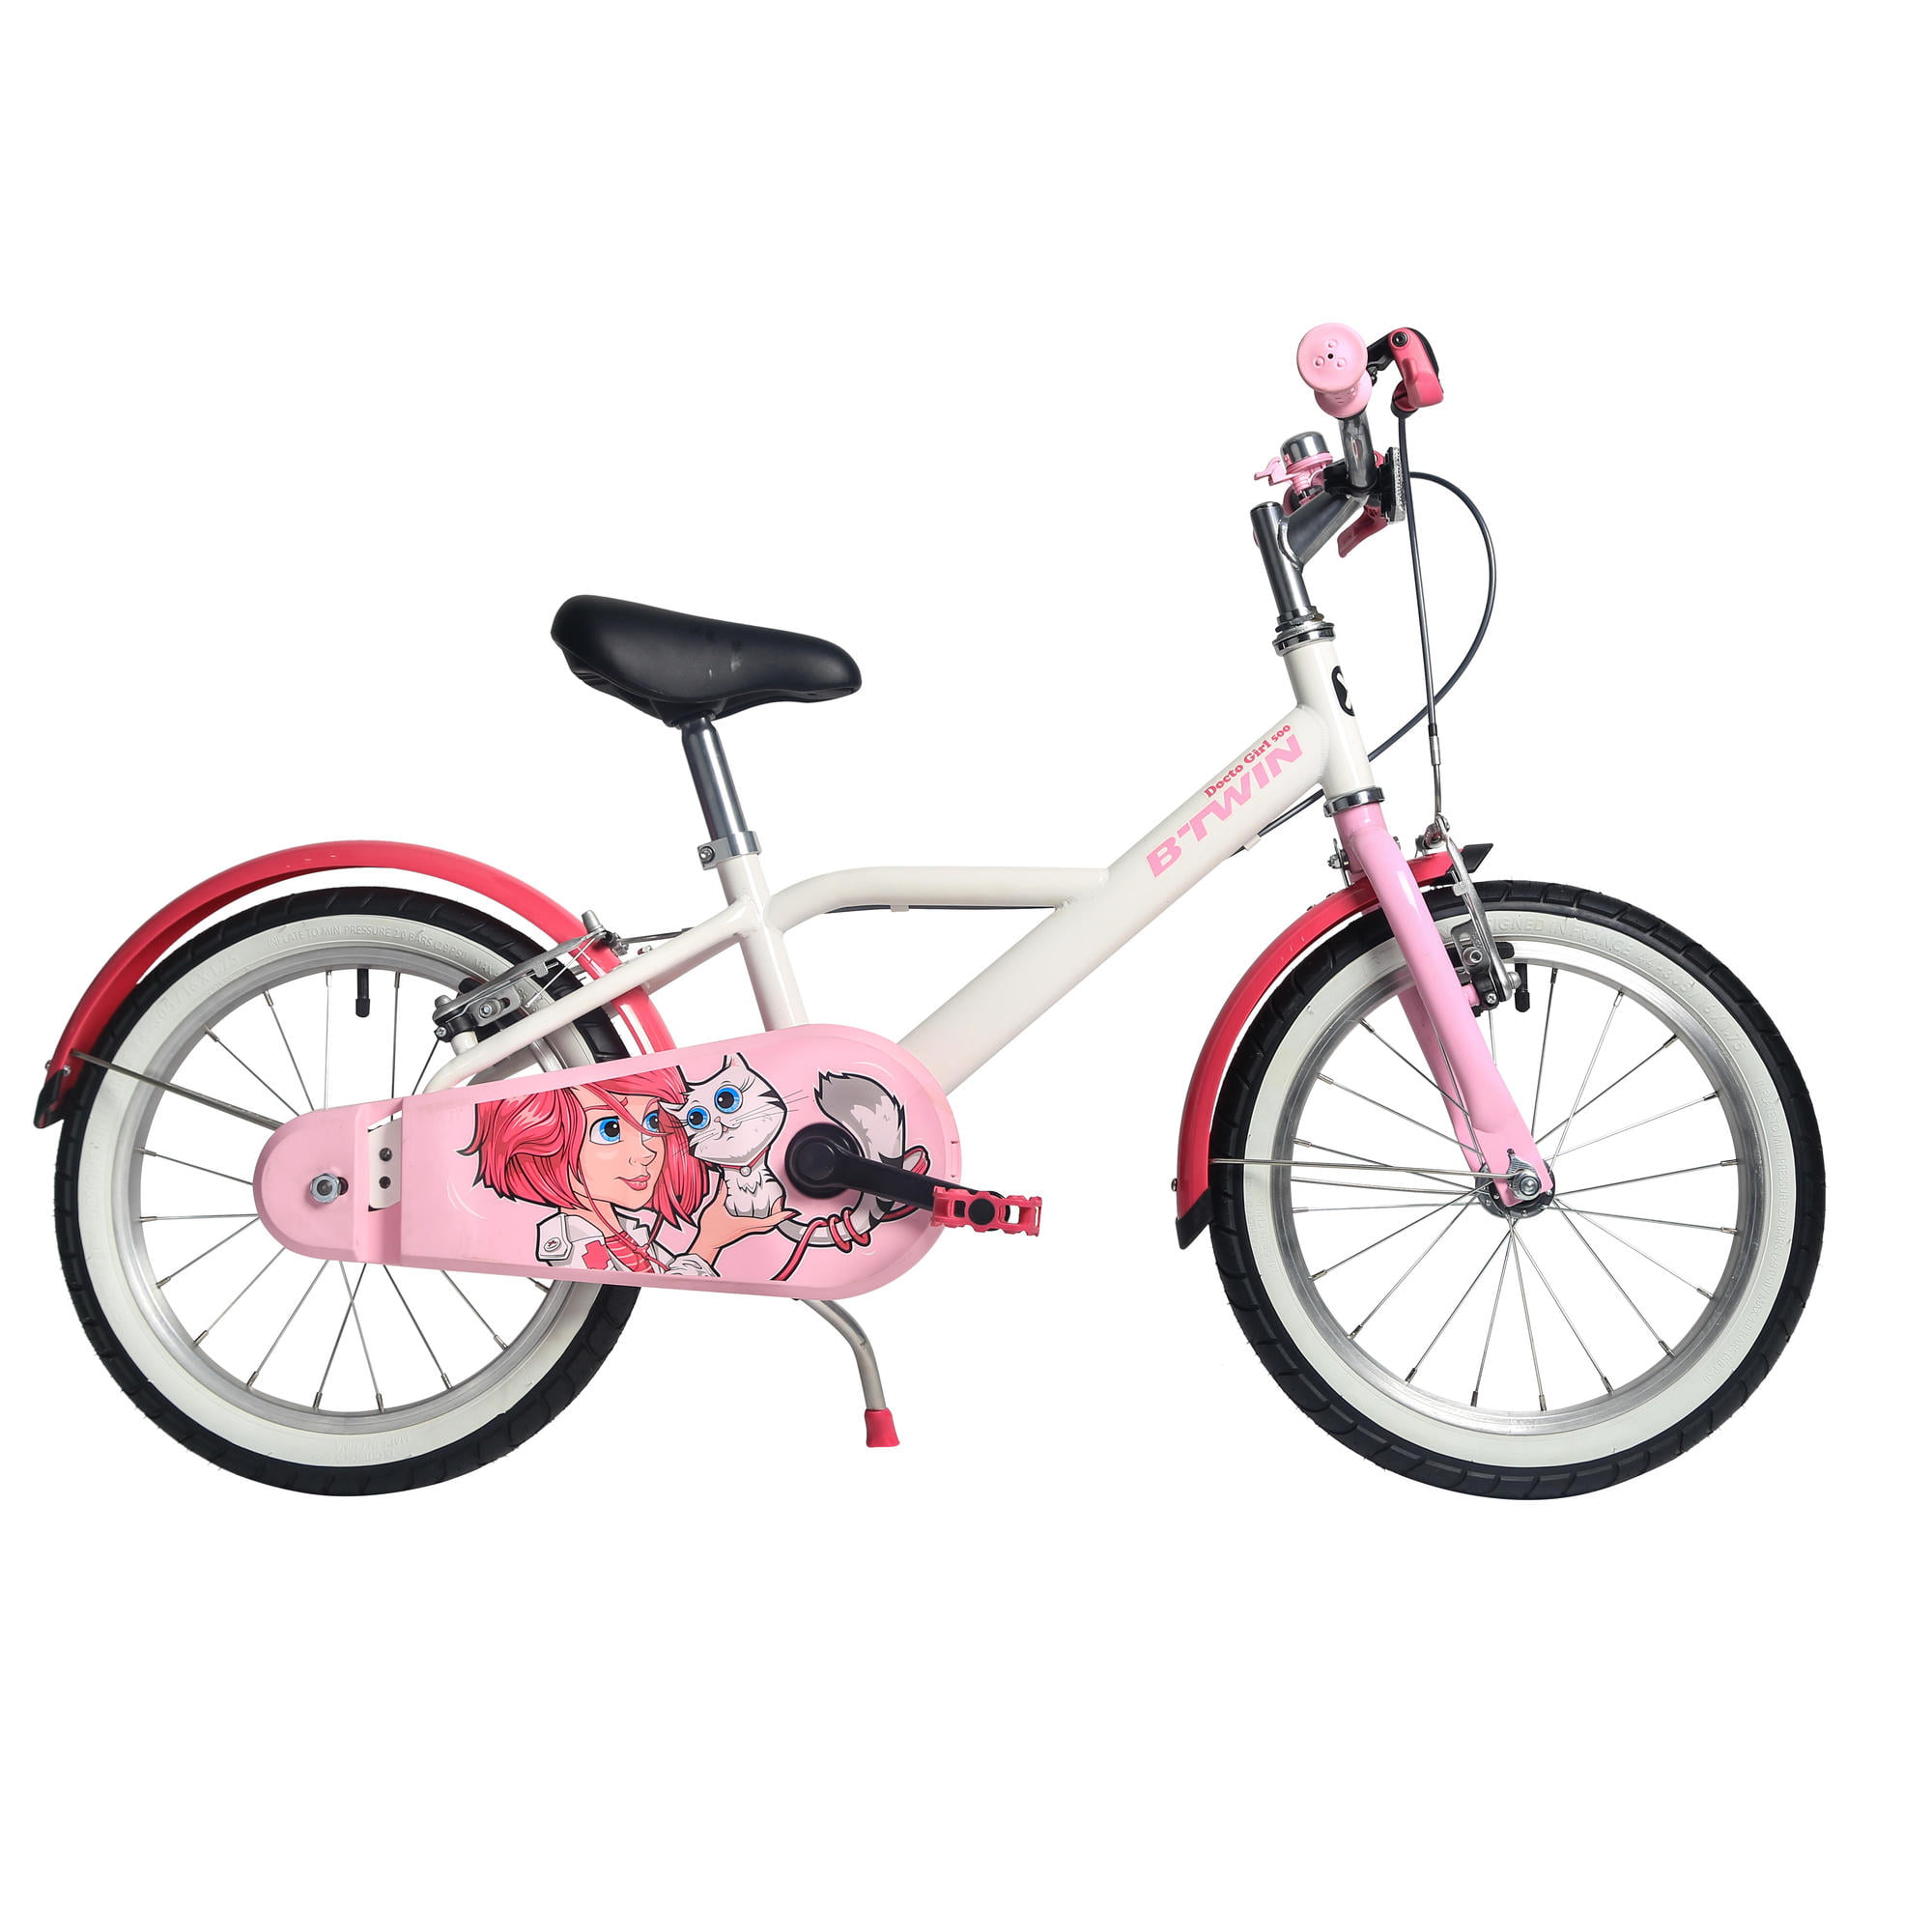 btwin for kids